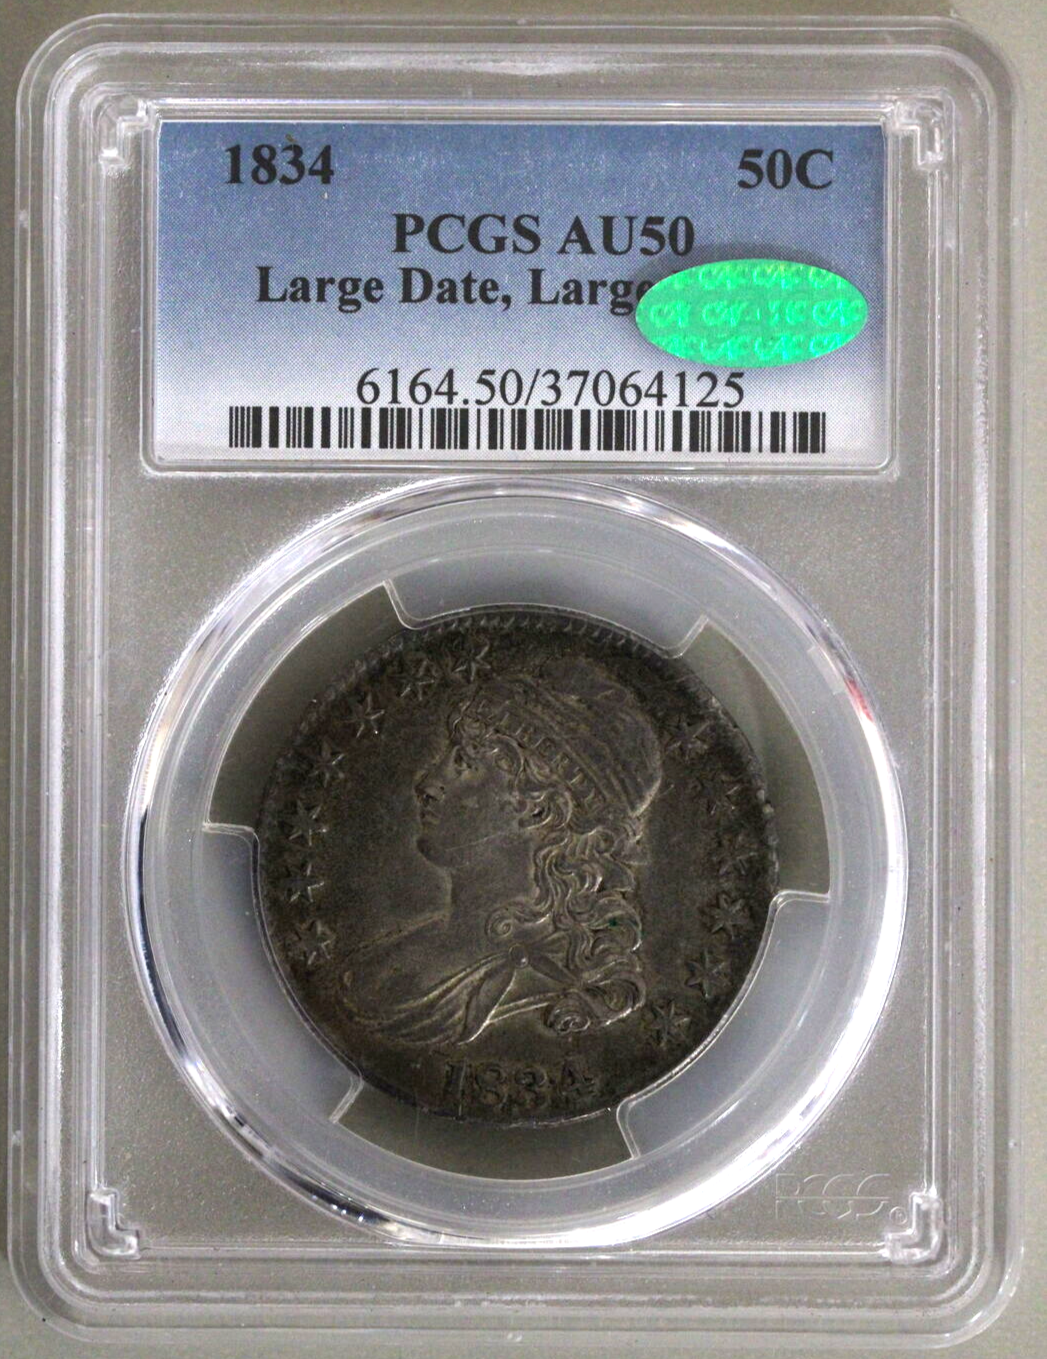 1834 (AU50 CAC) Capped Bust Half Dollar (Large Date Large Letters) 50c PCGS Coin